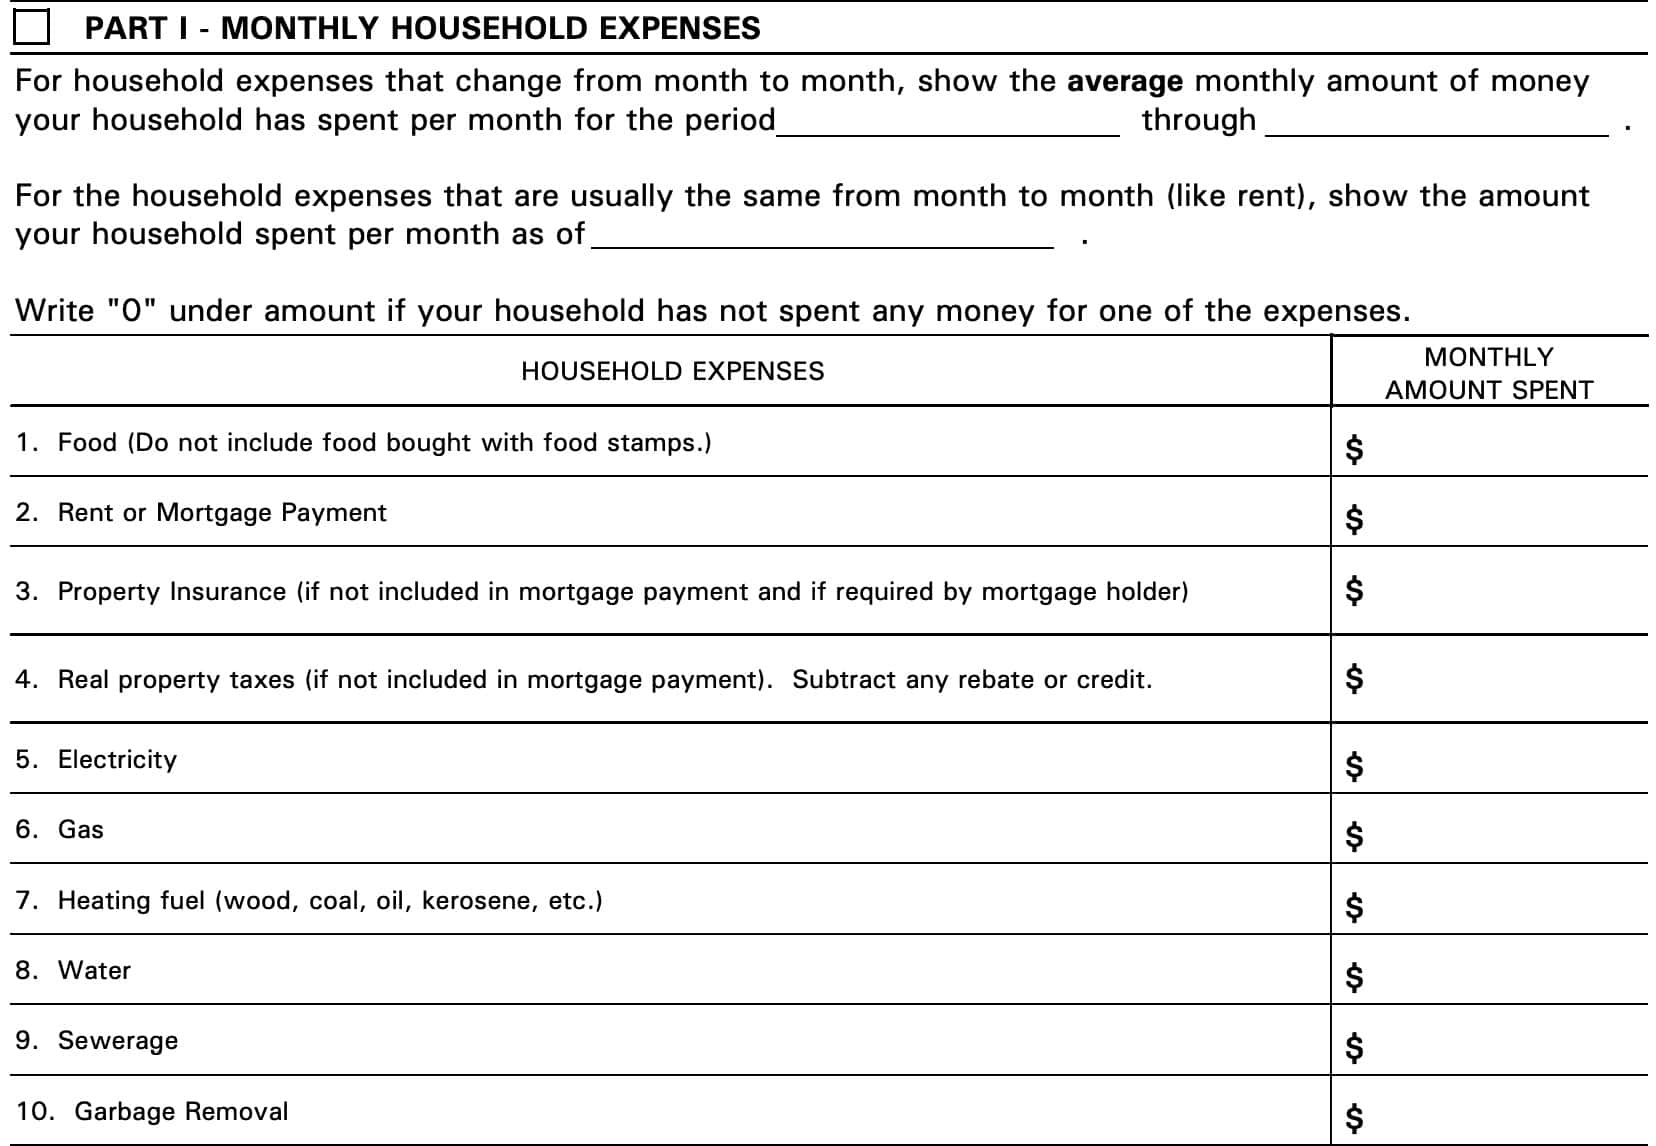 part i: monthly household expenses